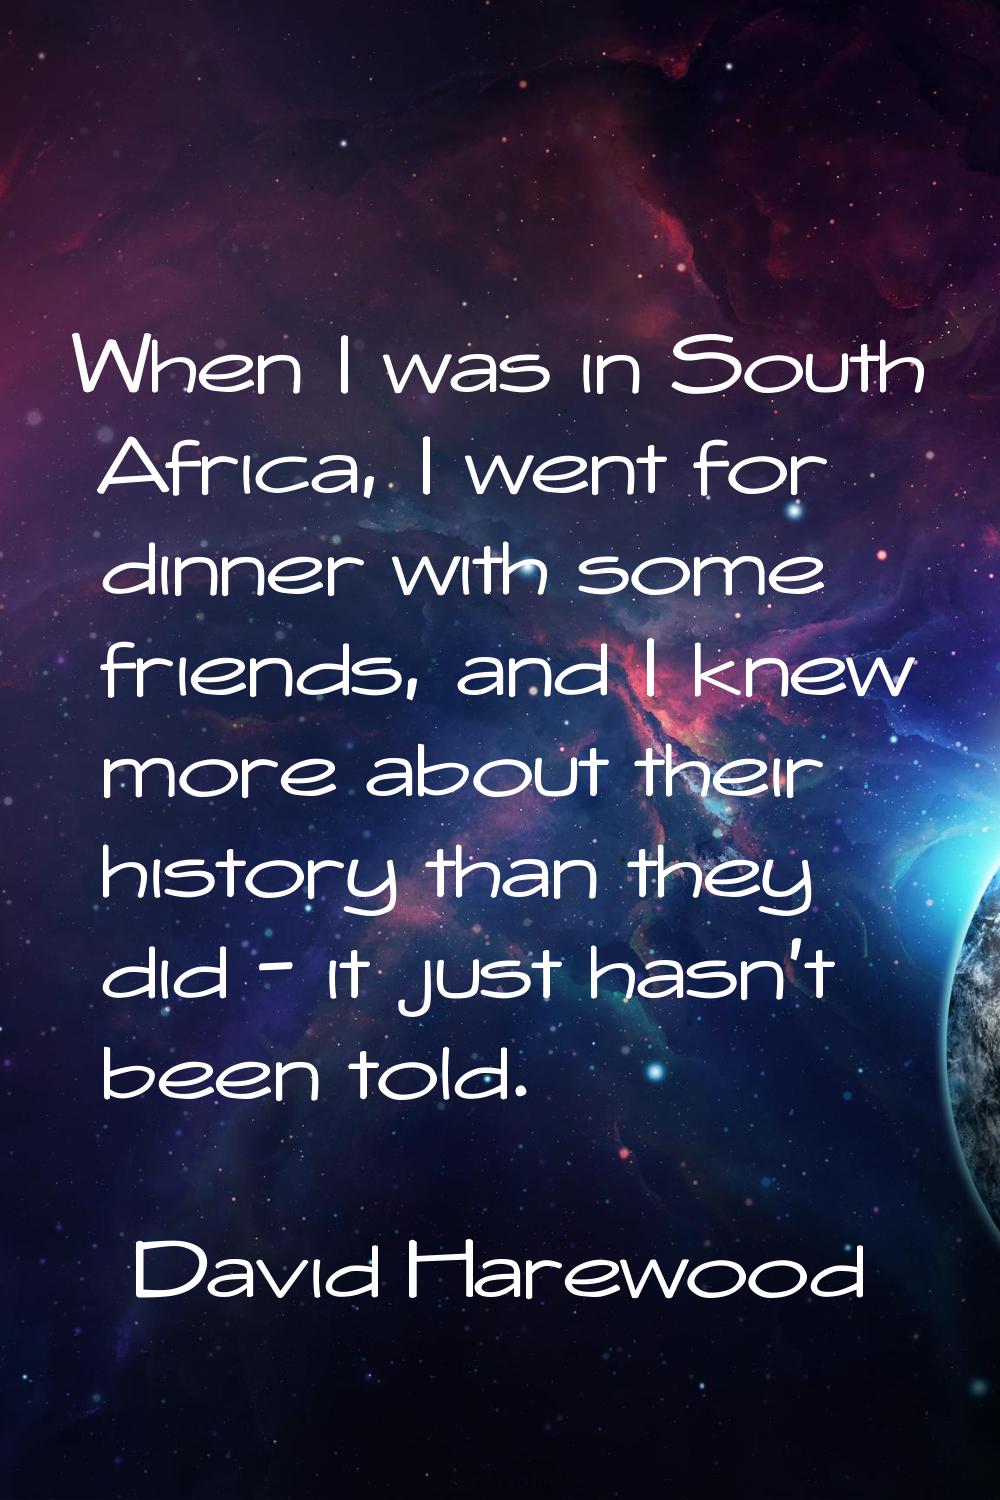 When I was in South Africa, I went for dinner with some friends, and I knew more about their histor